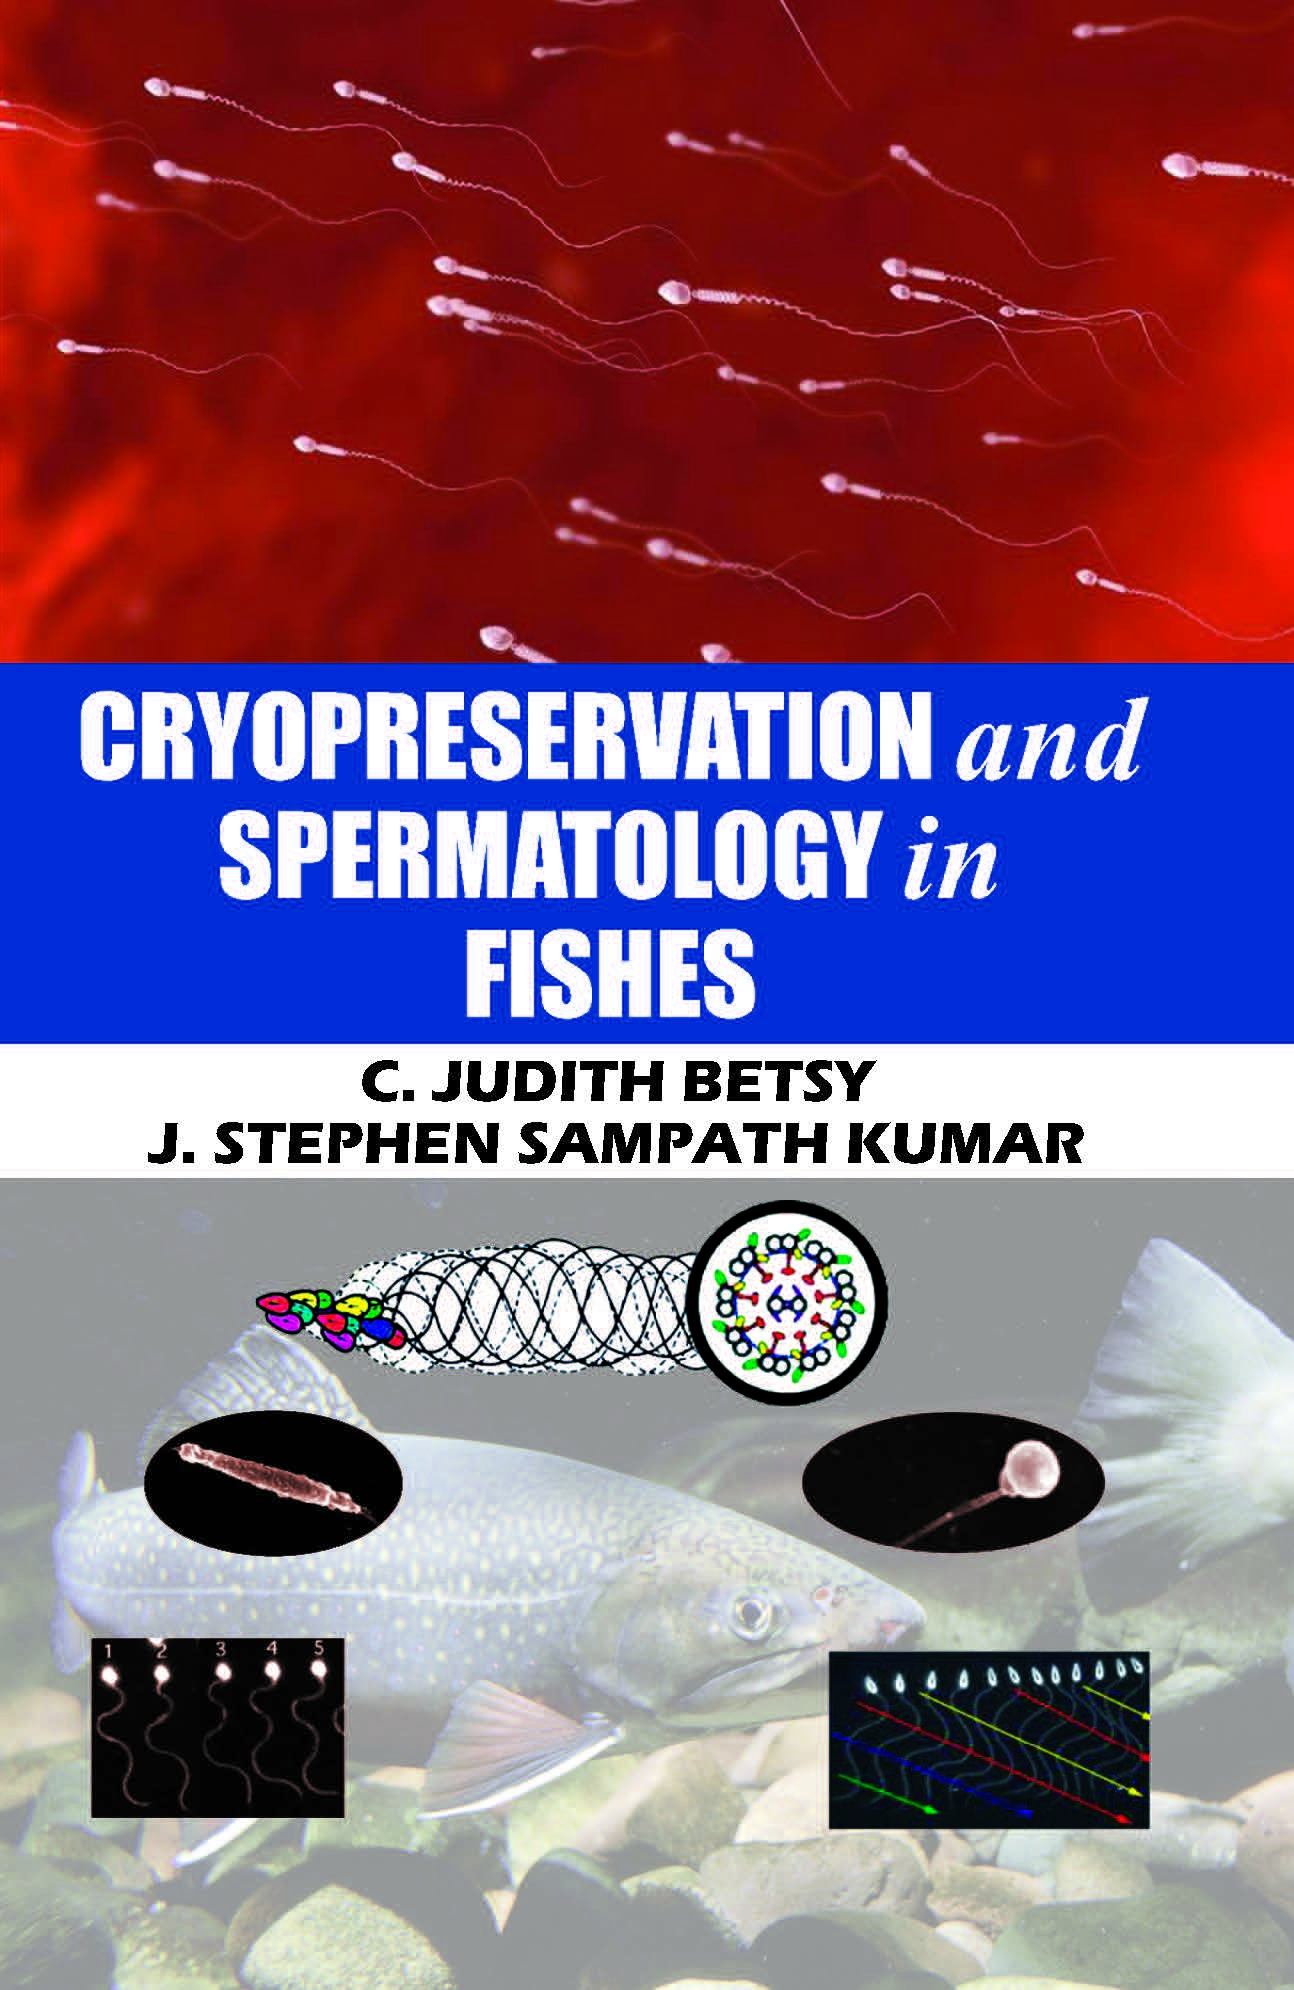 Crypreservation & Spermatology in Fishes